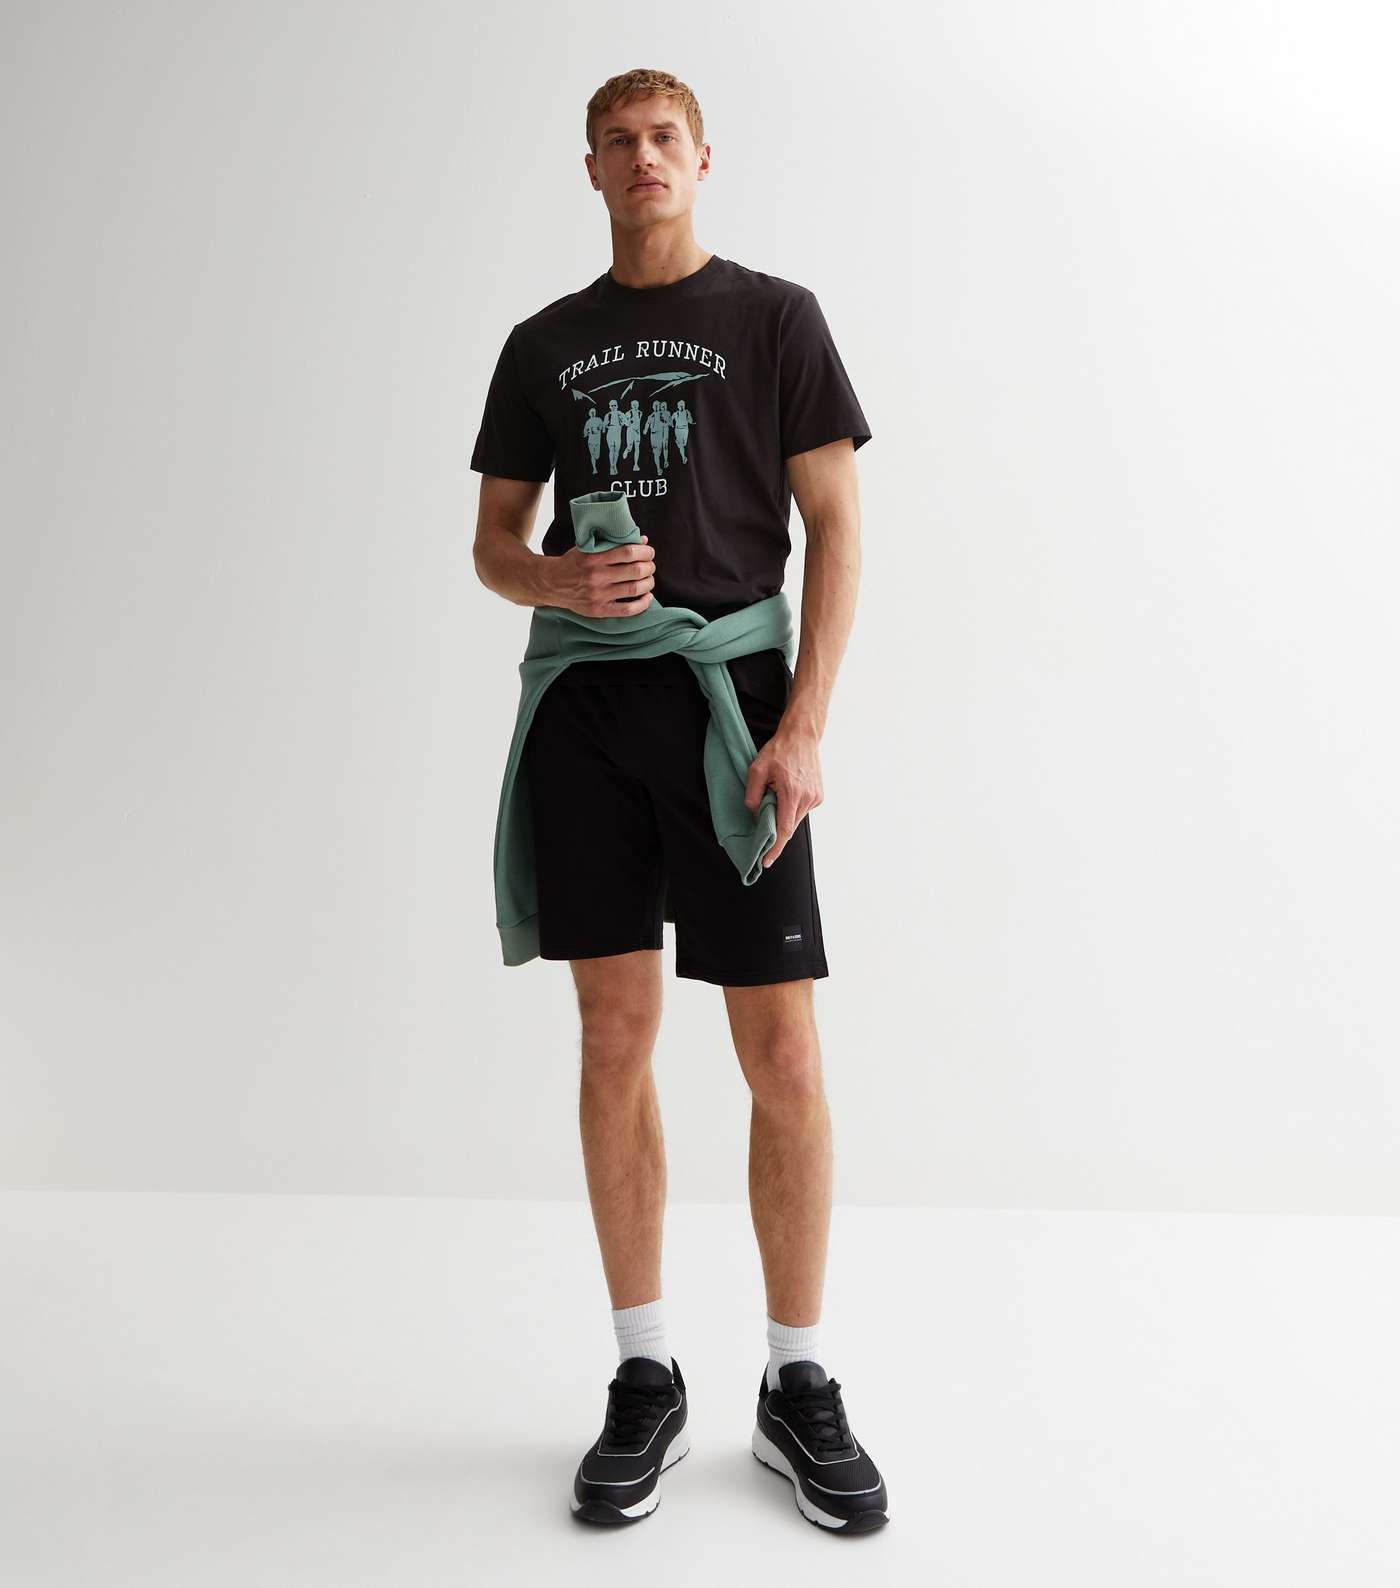 Only & Sons Black Jersey Shorts Image 3